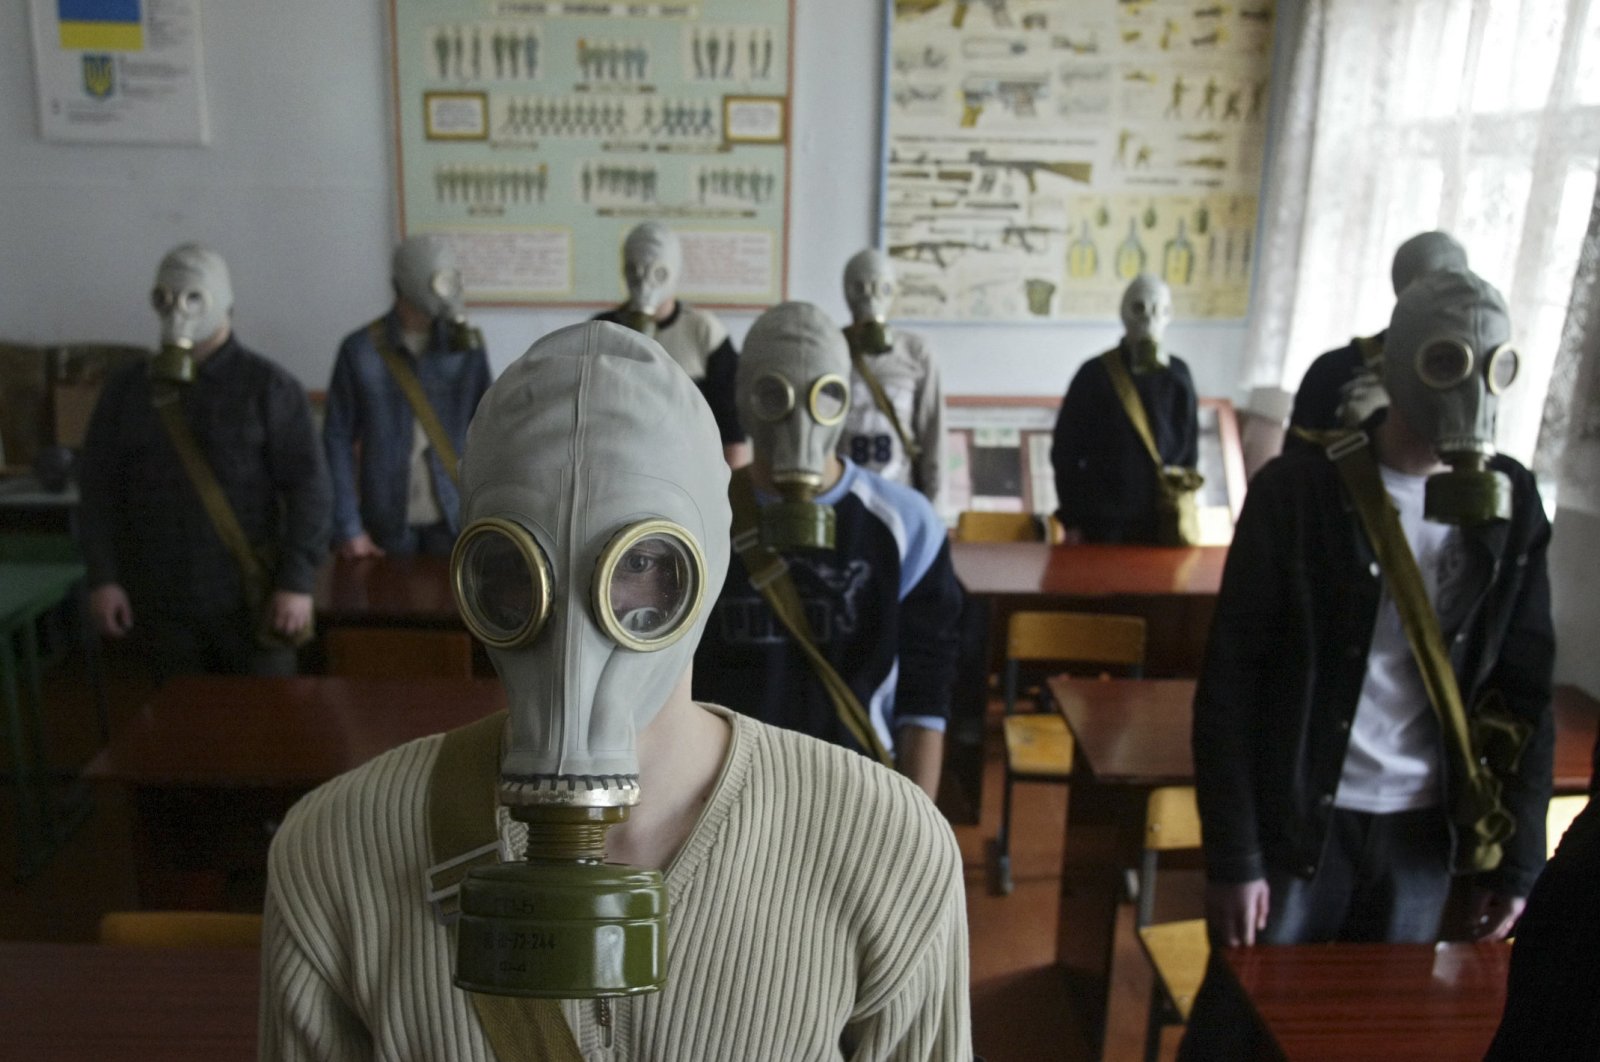 Schoolchildren wear gas masks during nuclear safety training lessons in Rudo, near the isolated zone around Chernobyl nuclear power plant, Ukraine, April 3, 2006. (AP Photo)